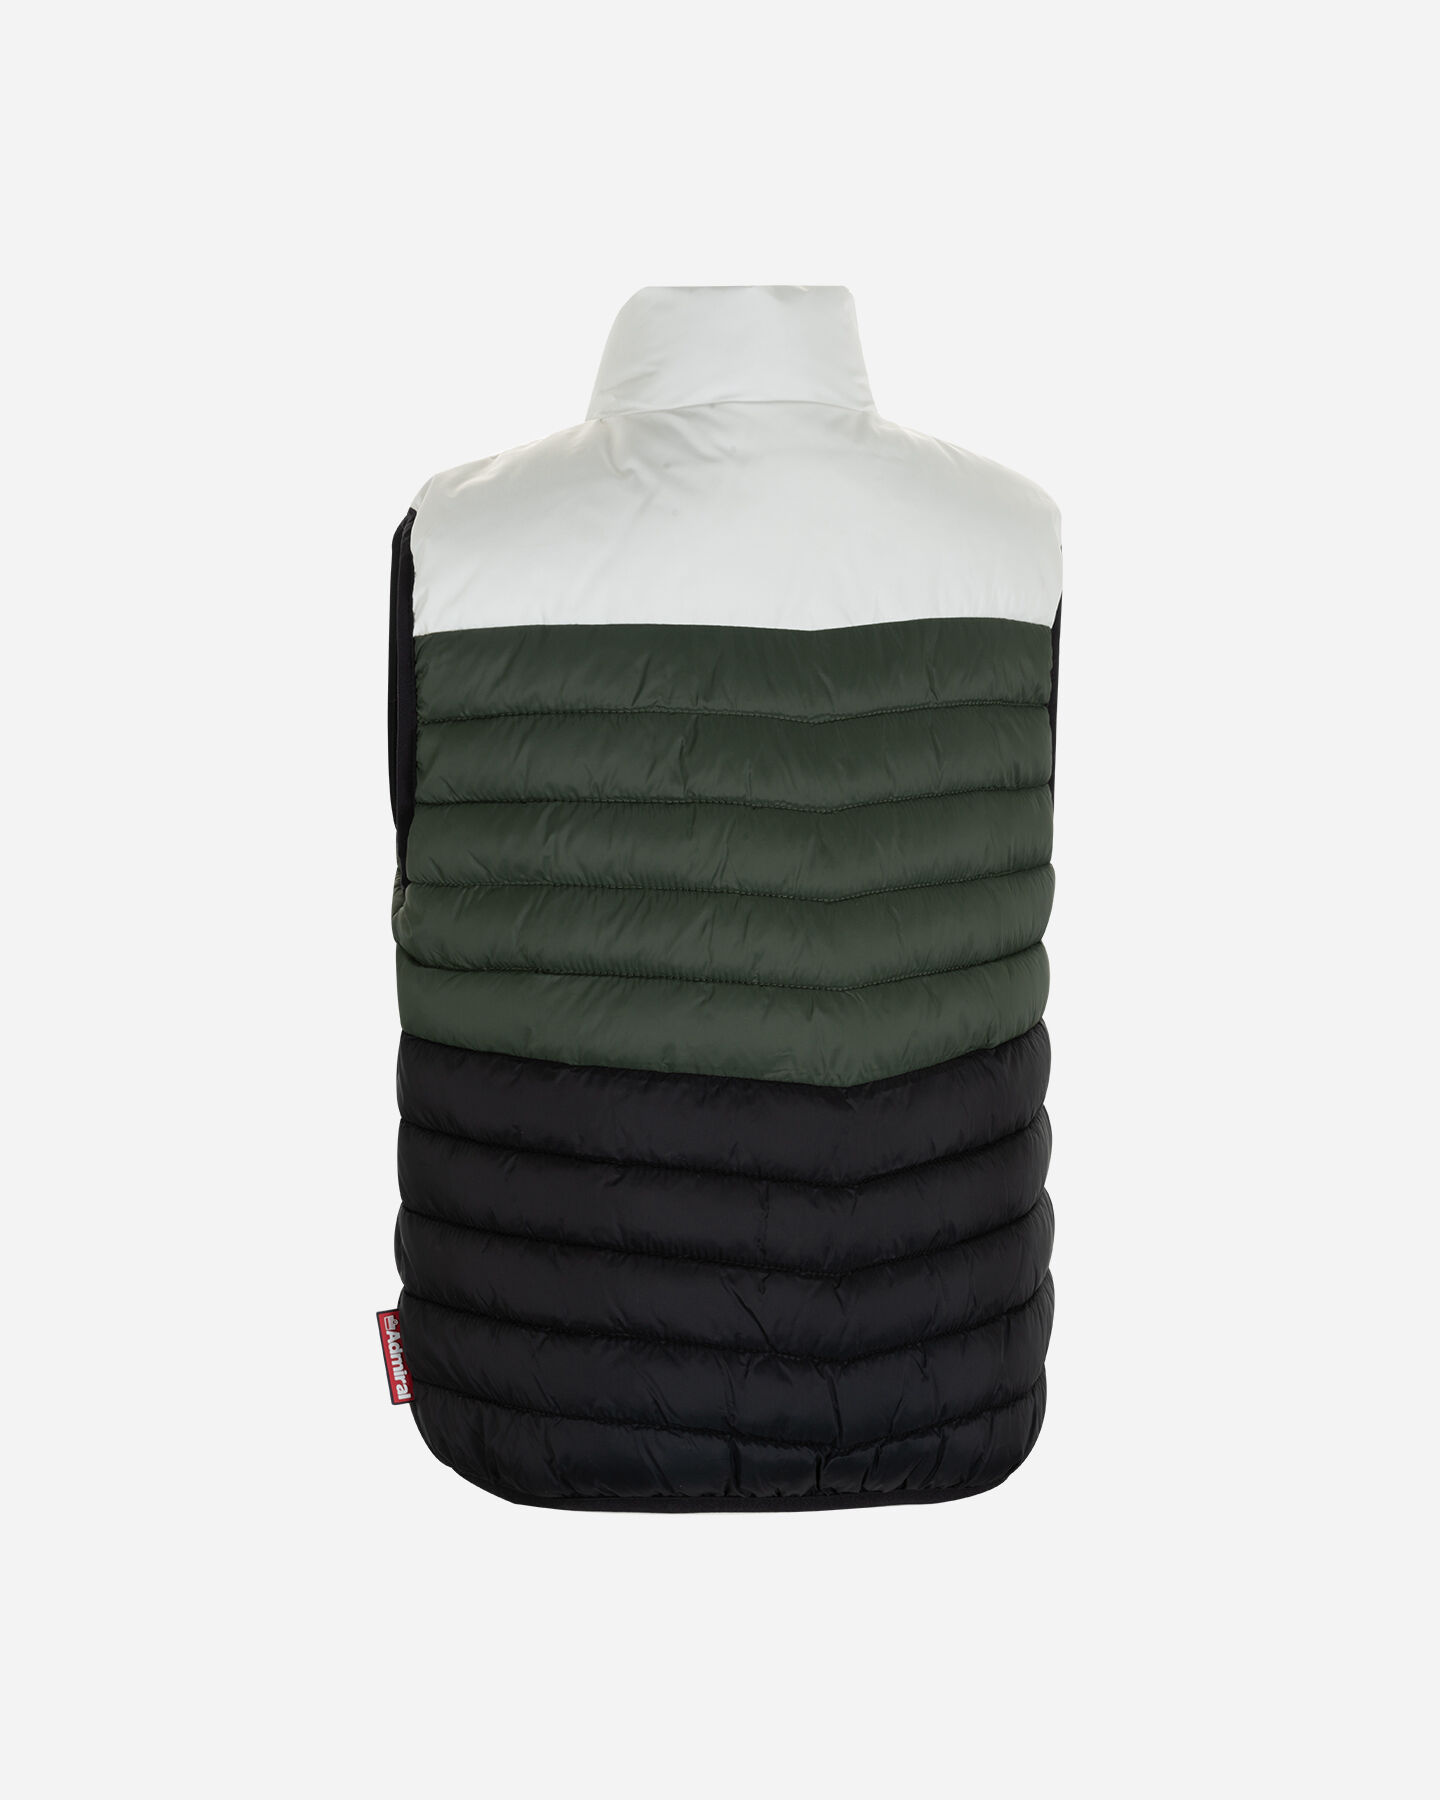  Gilet ADMIRAL LIFESTYLE JR S4106025|1040/783|6A scatto 1